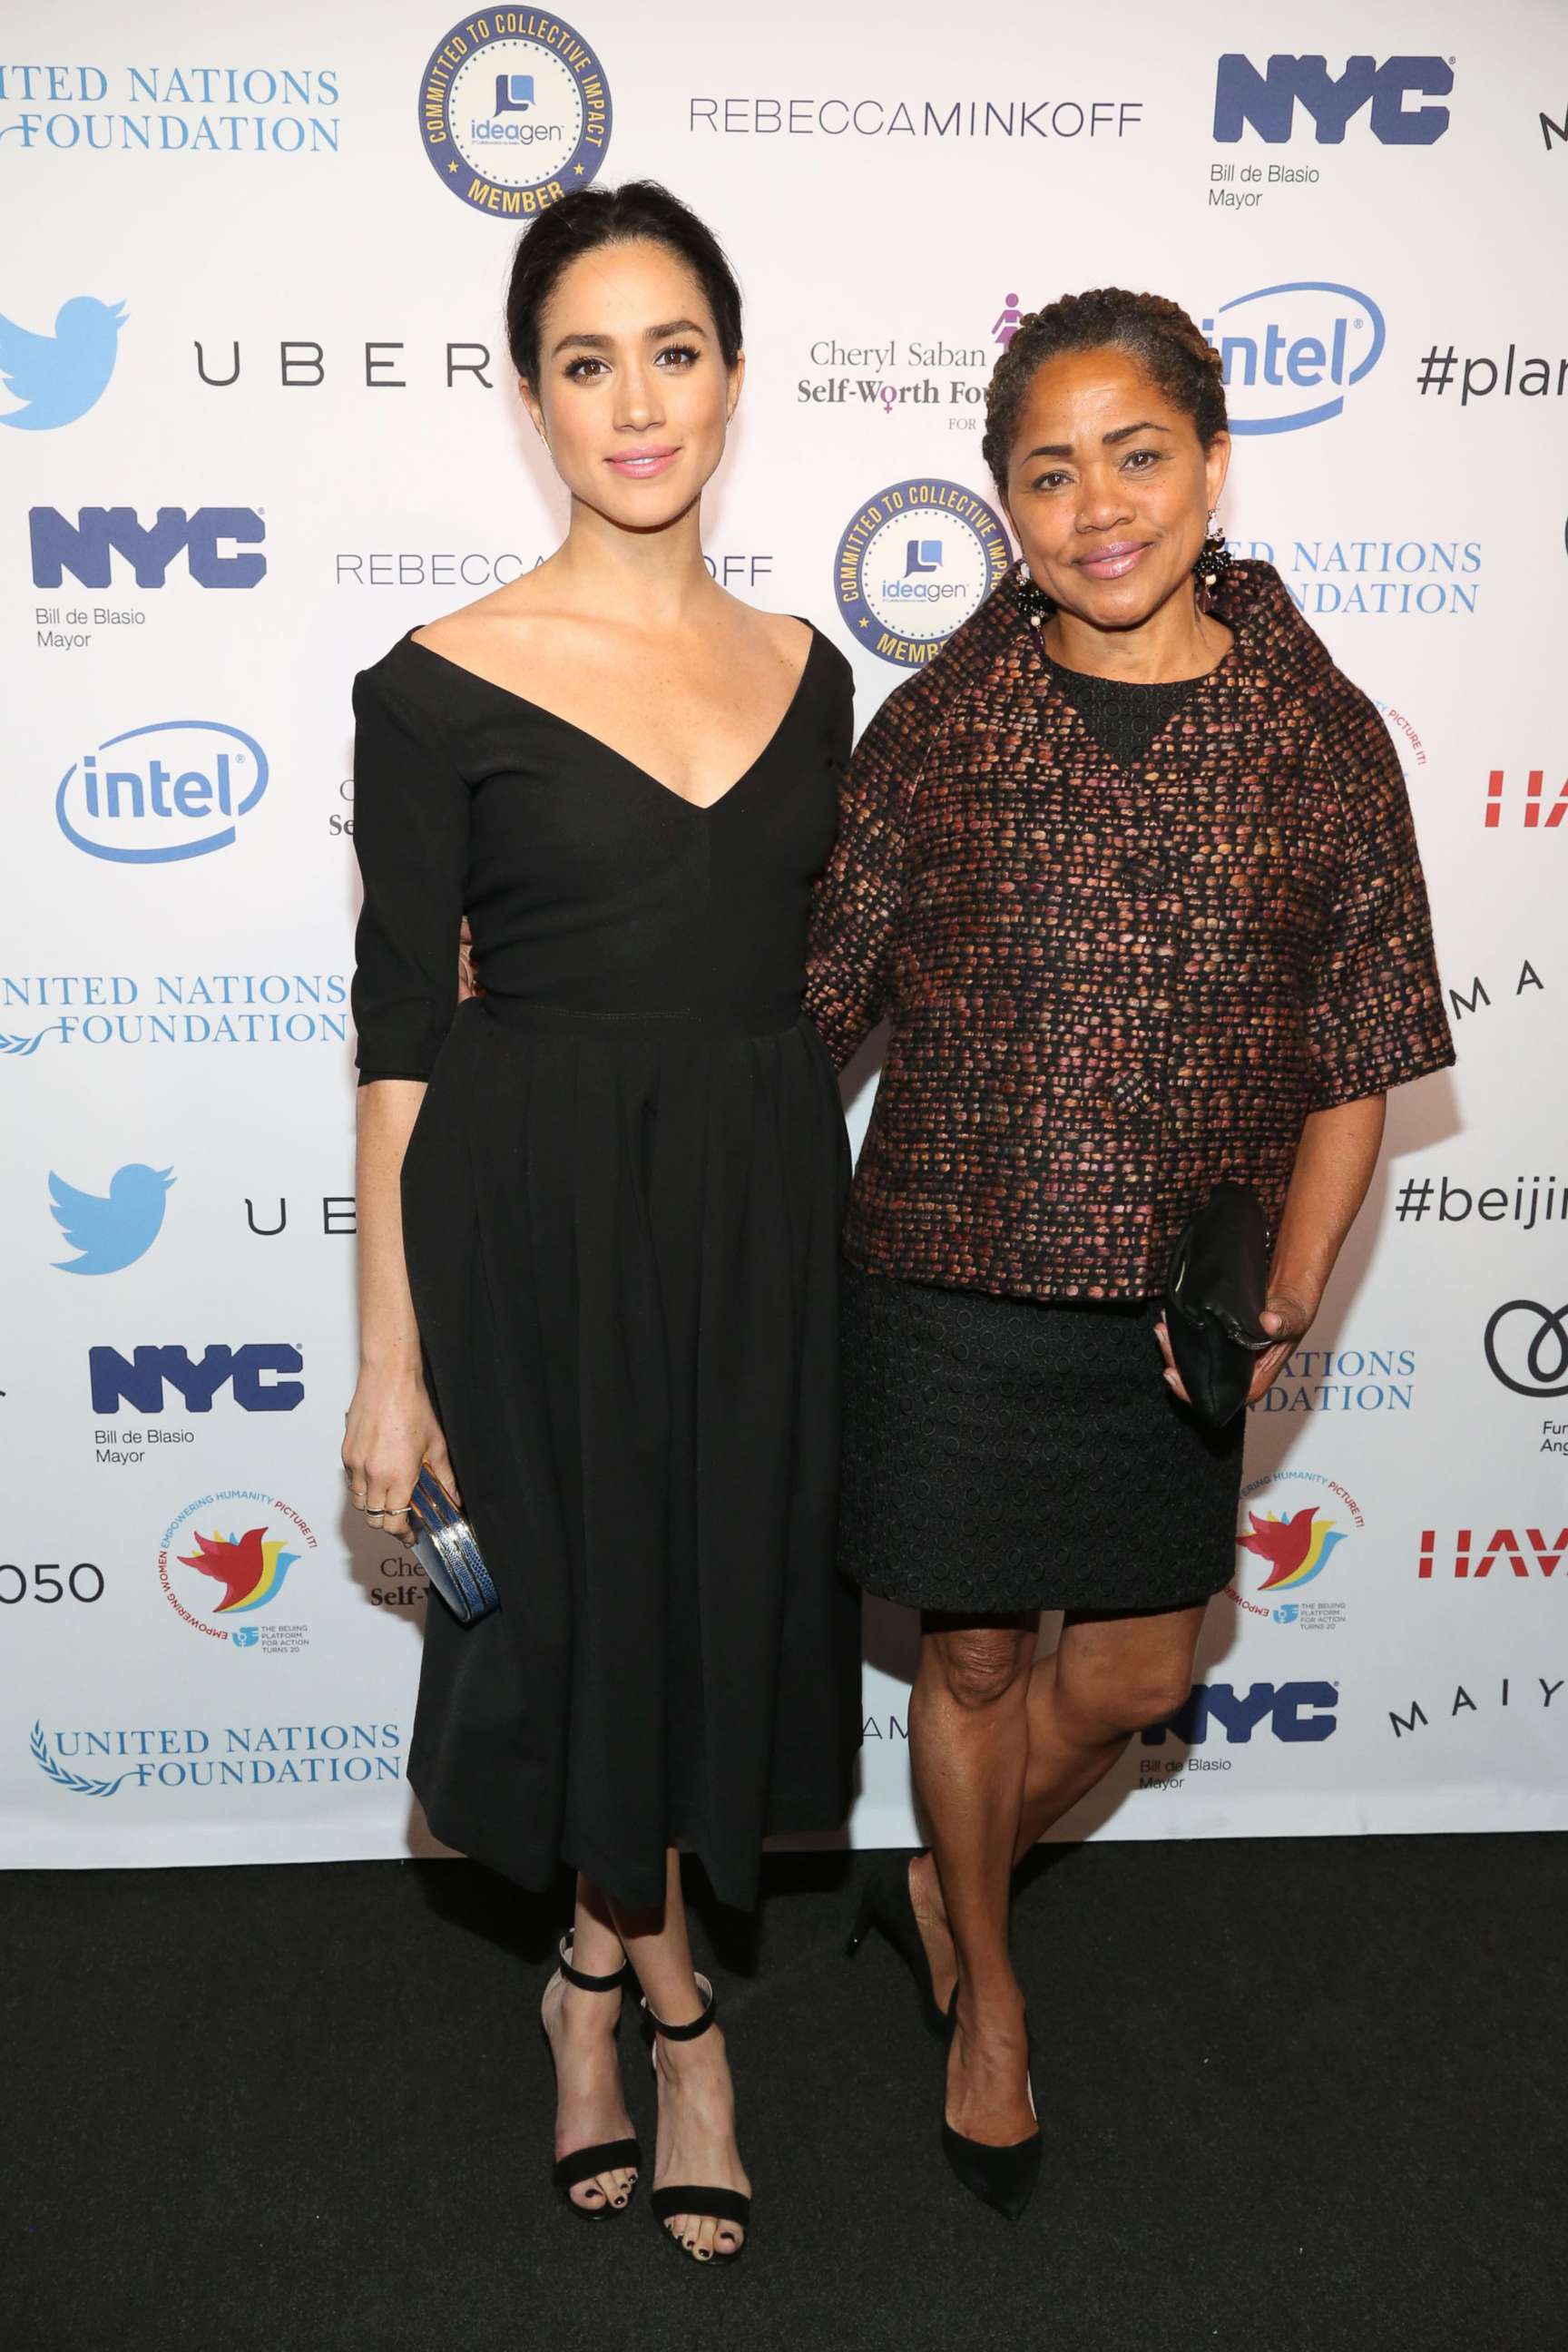 PHOTO: Meghan Markle and her mother Doria Ragland attend UN Women's 20th Anniversary of the Fourth World Conference of Women in Beijing at Manhattan Centre at Hammerstein Ballroom on March 10, 2015 in New York.